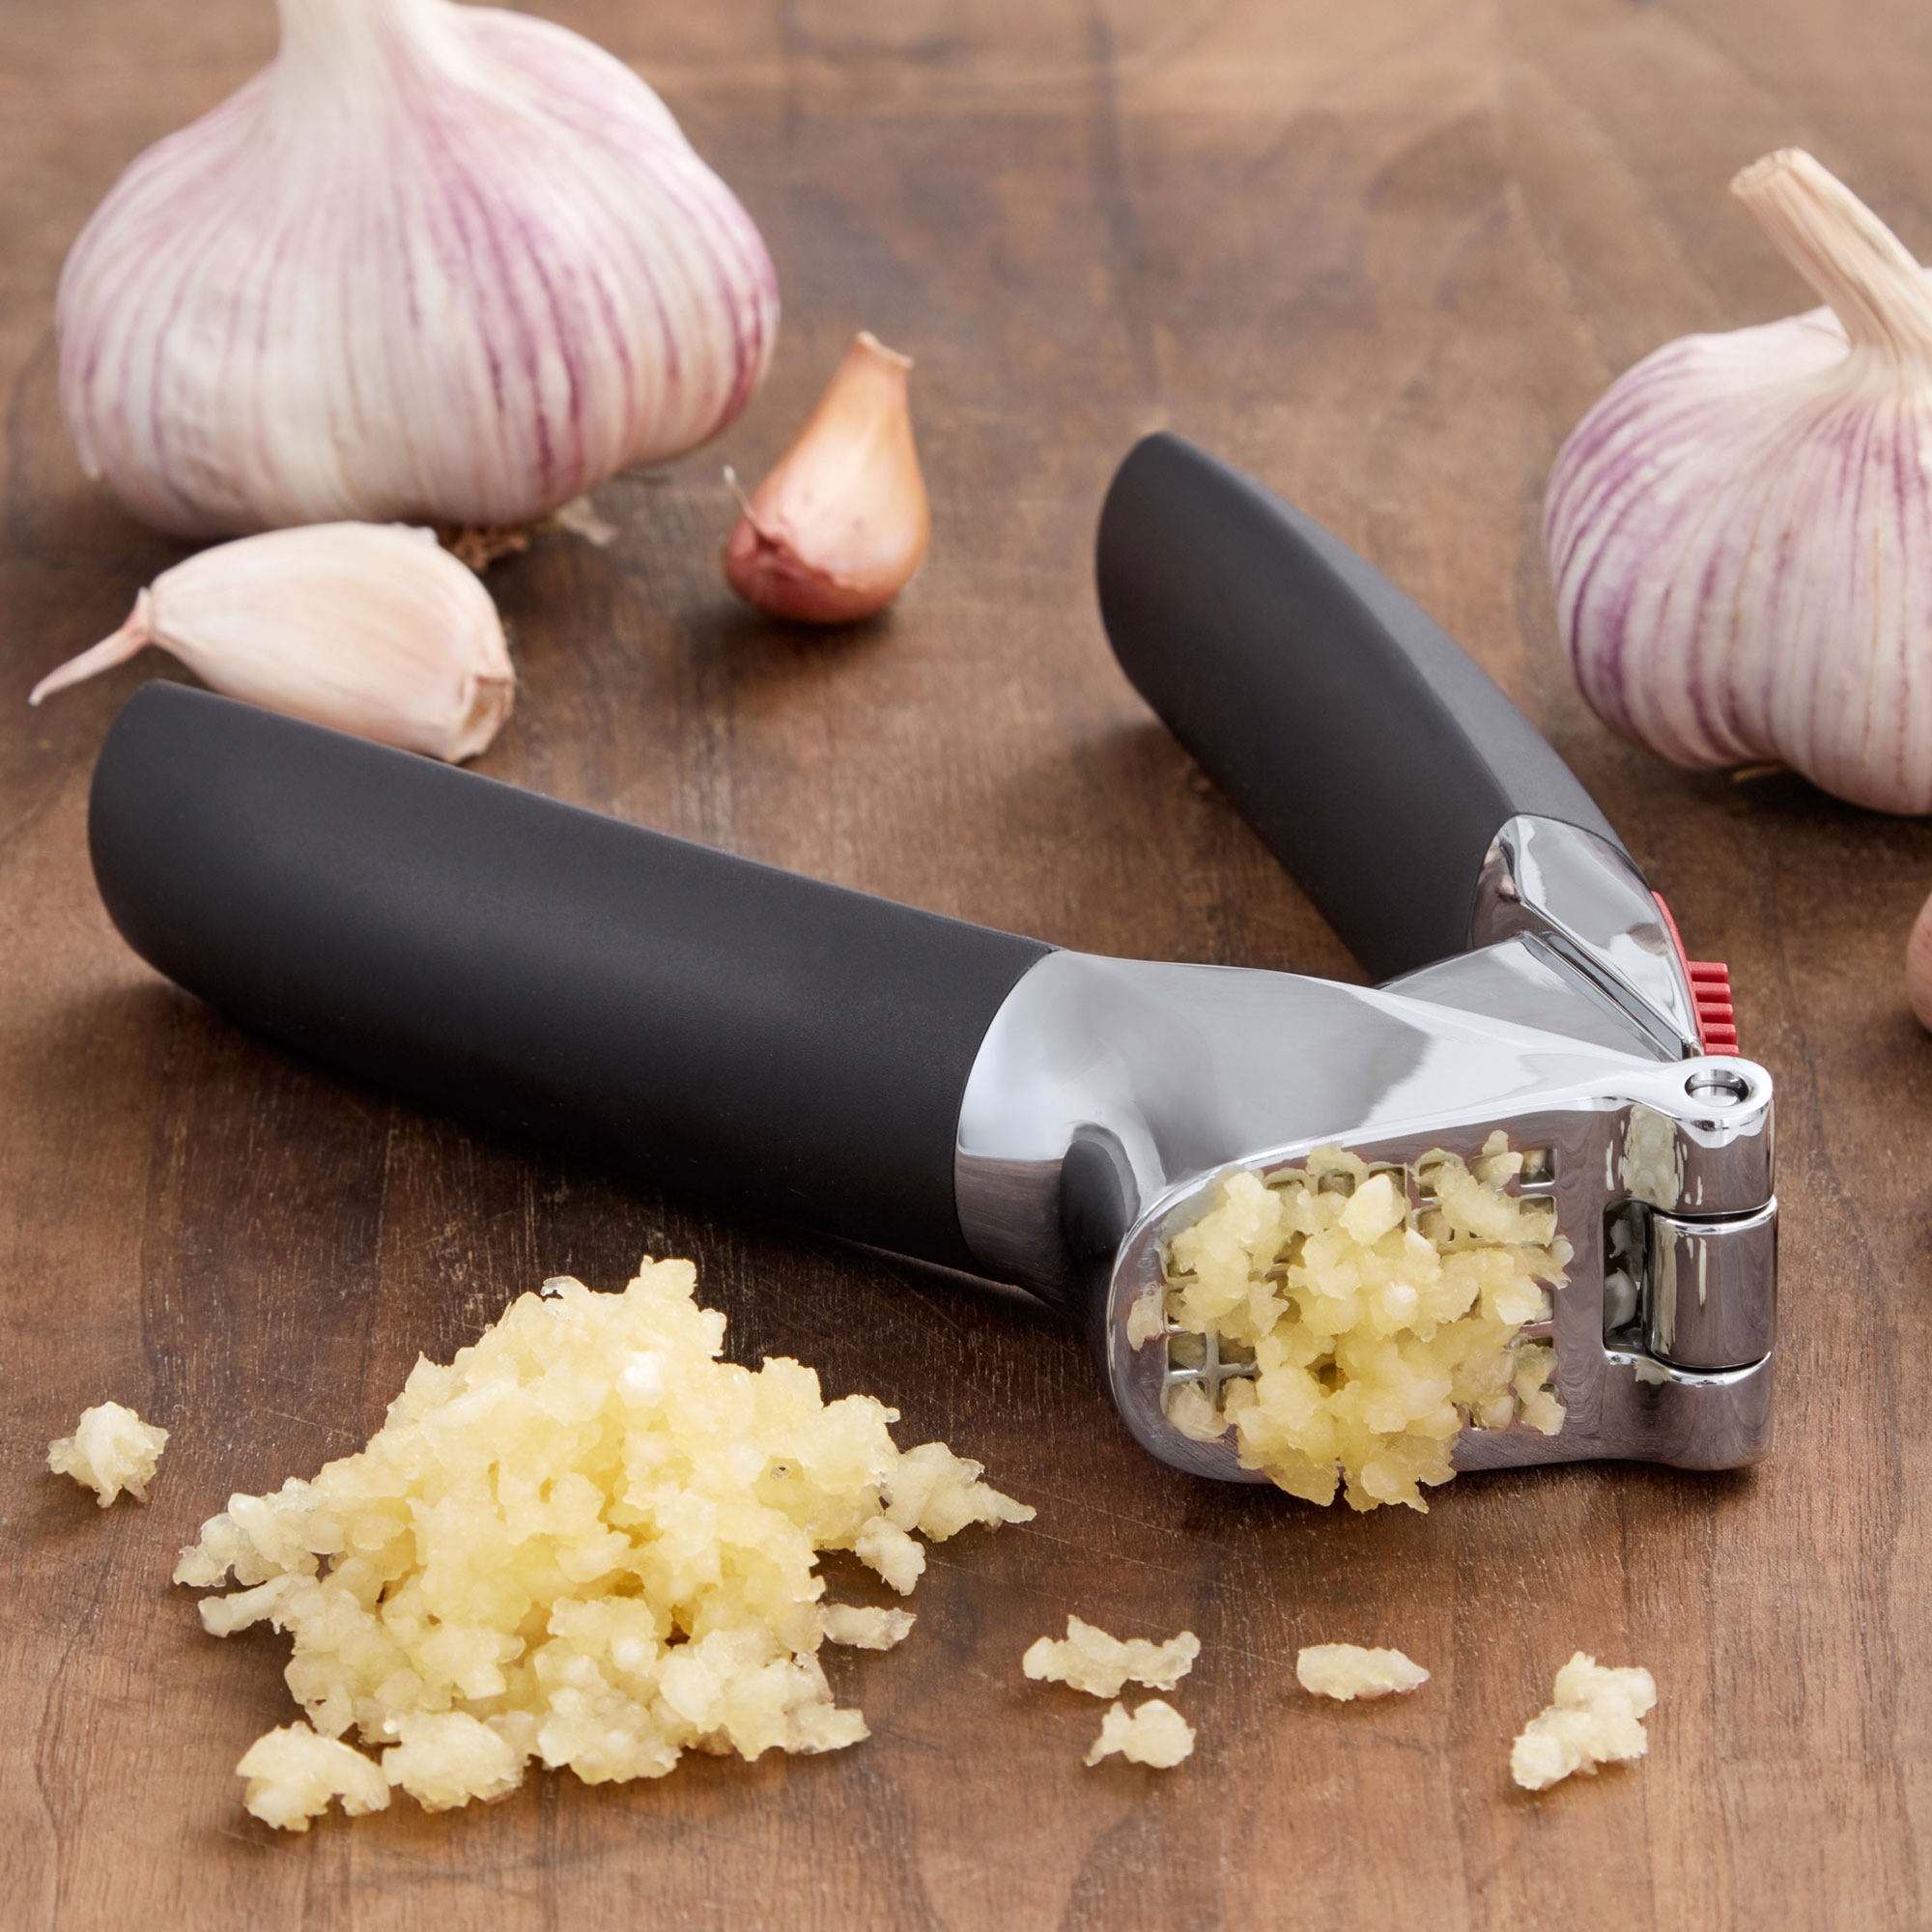 OXO Good Grips Garlic Press with Built In Cleaner Image 2